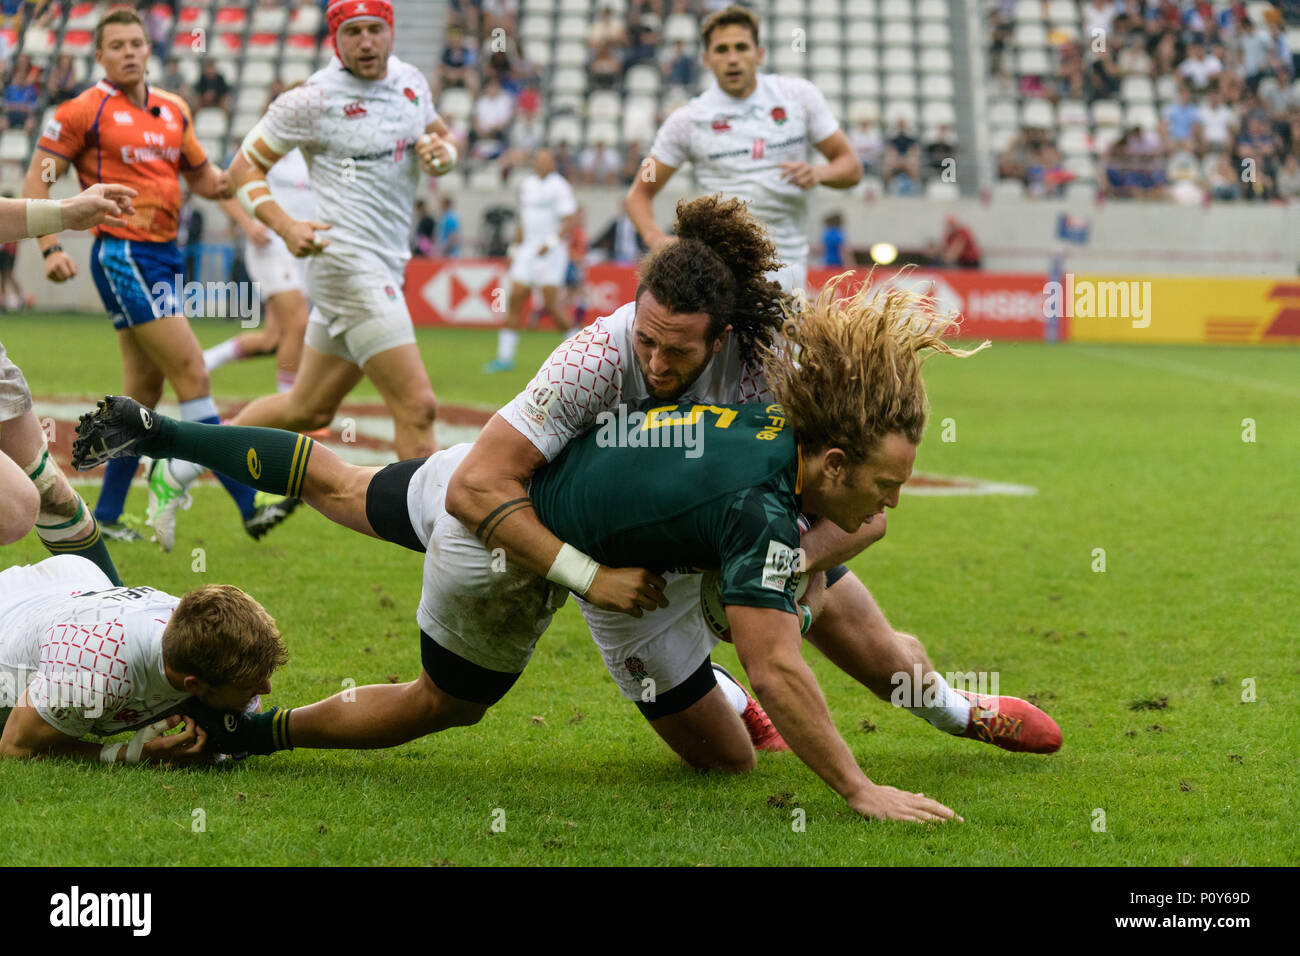 Paris, France. 10th Jun, 2018. Springboks player Werner Kok is tackled by English Mike Ellery during the final of HSBC Paris Sevens Series. South Africa wins both the tournament and the 2018 Sevens World Series. Paris, France,  June 10th 2018. Stock Photo